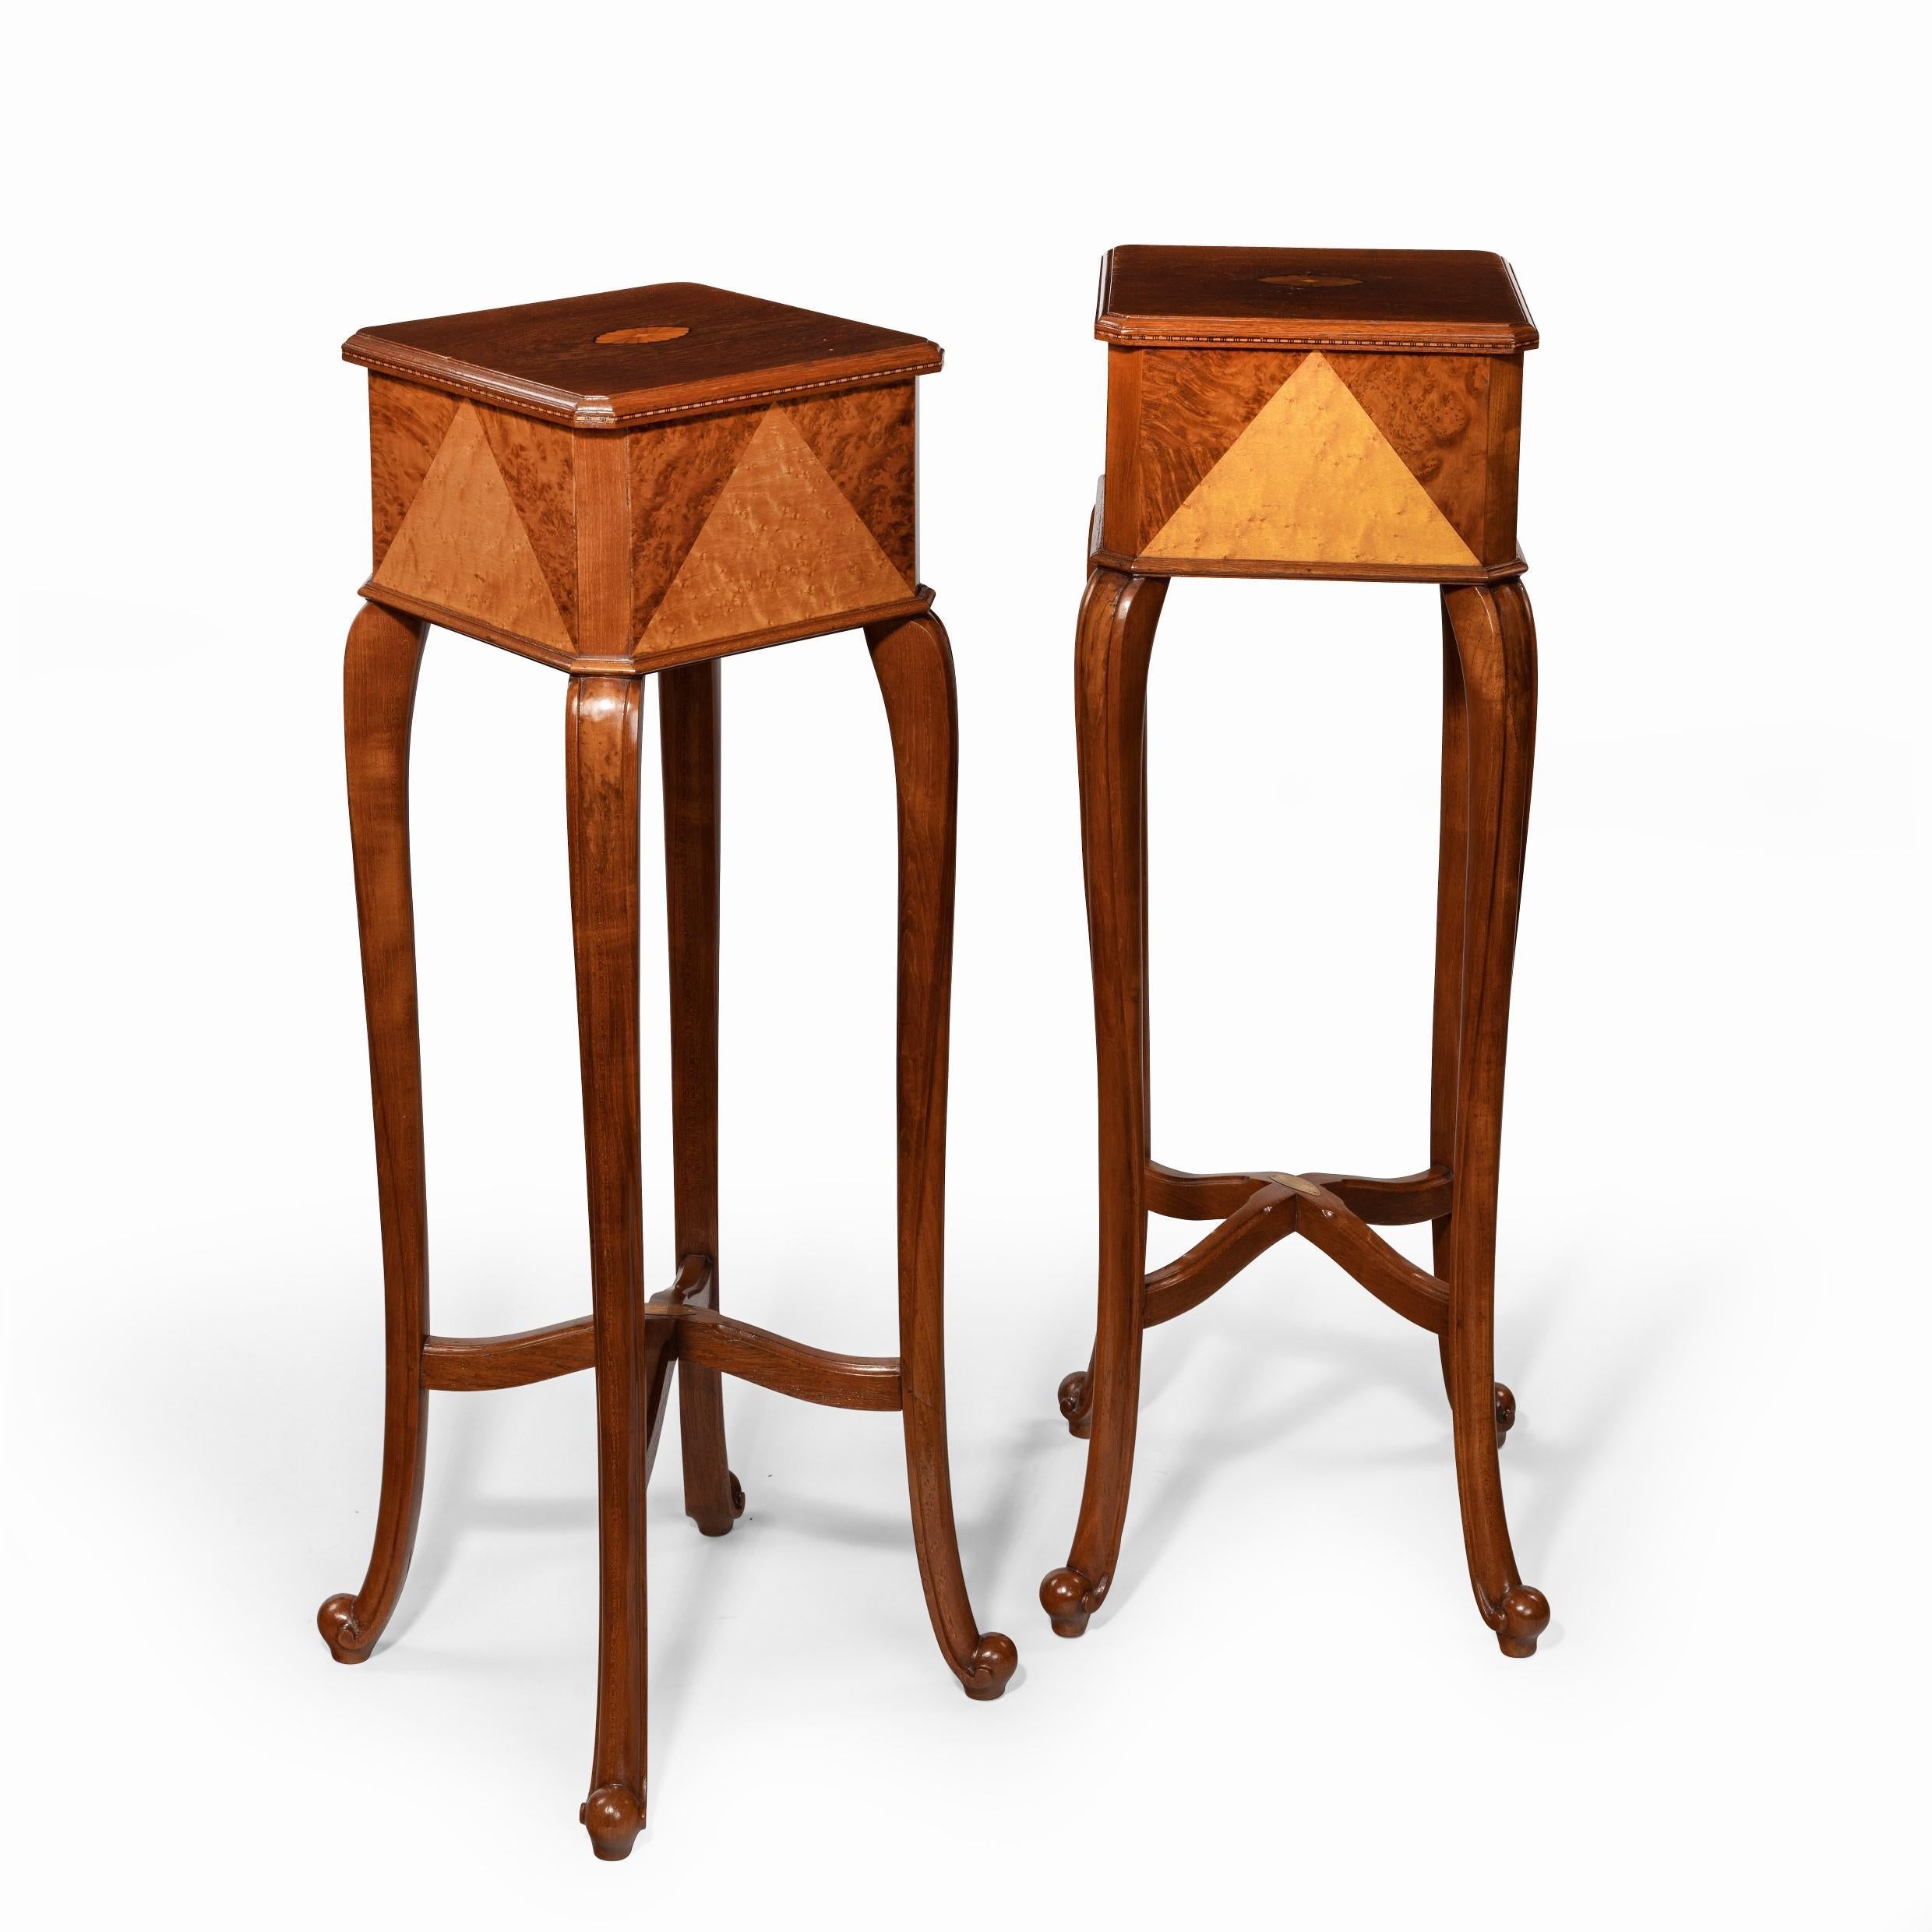 A pair of Anglo-Indian teak stands, each of square form raised upon four cabriole legs, the decoration comprising bold triangles of contrasting exotic woods, with an oval brass plaque reading ‘Navroji Dadabhoy & Co, Bombay, Cabinet makers’. Indian,